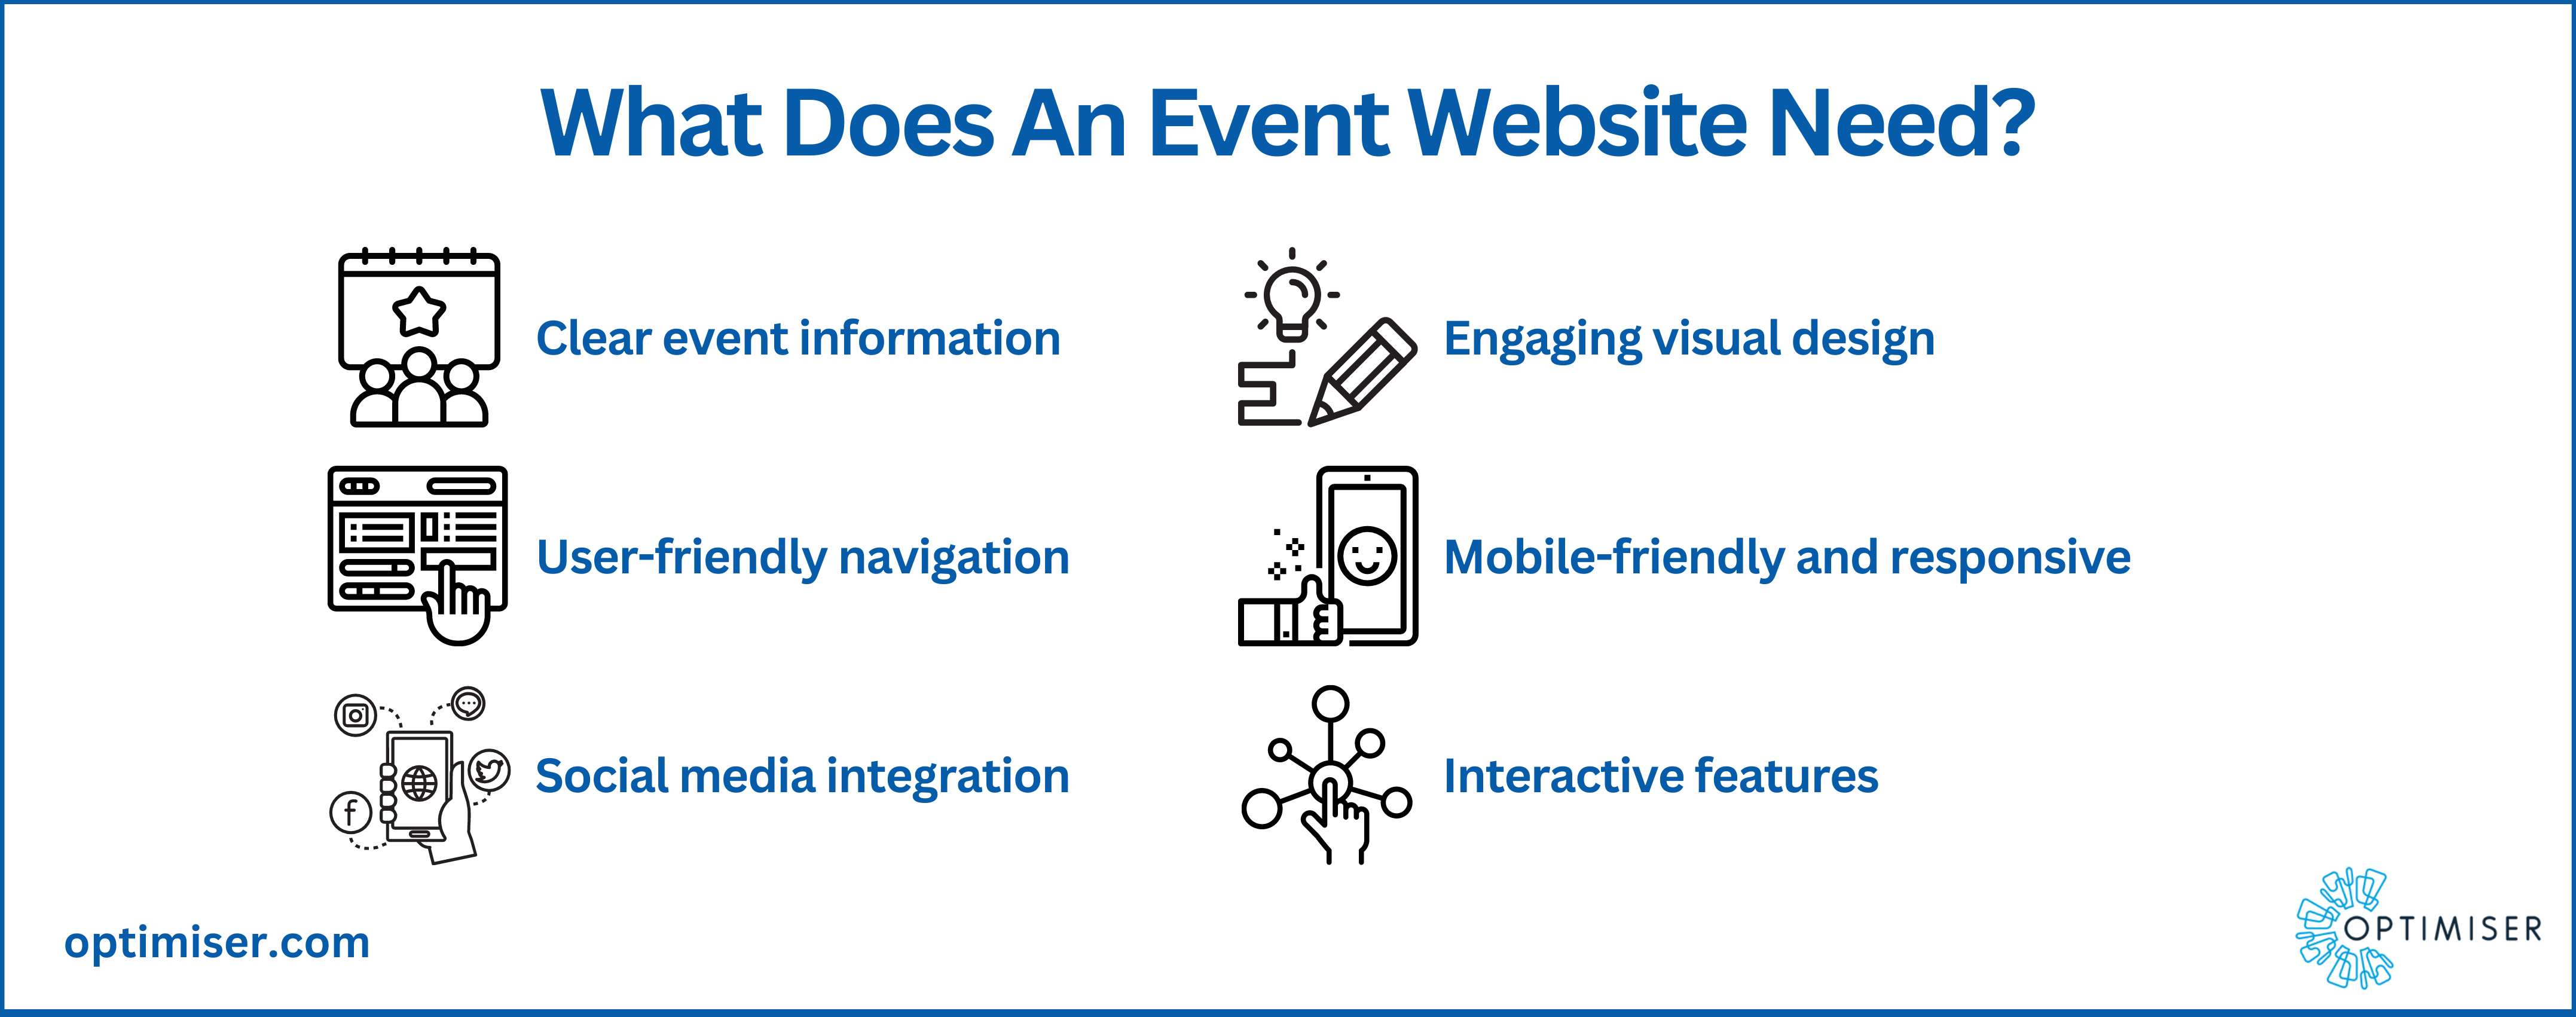 crm for event management software